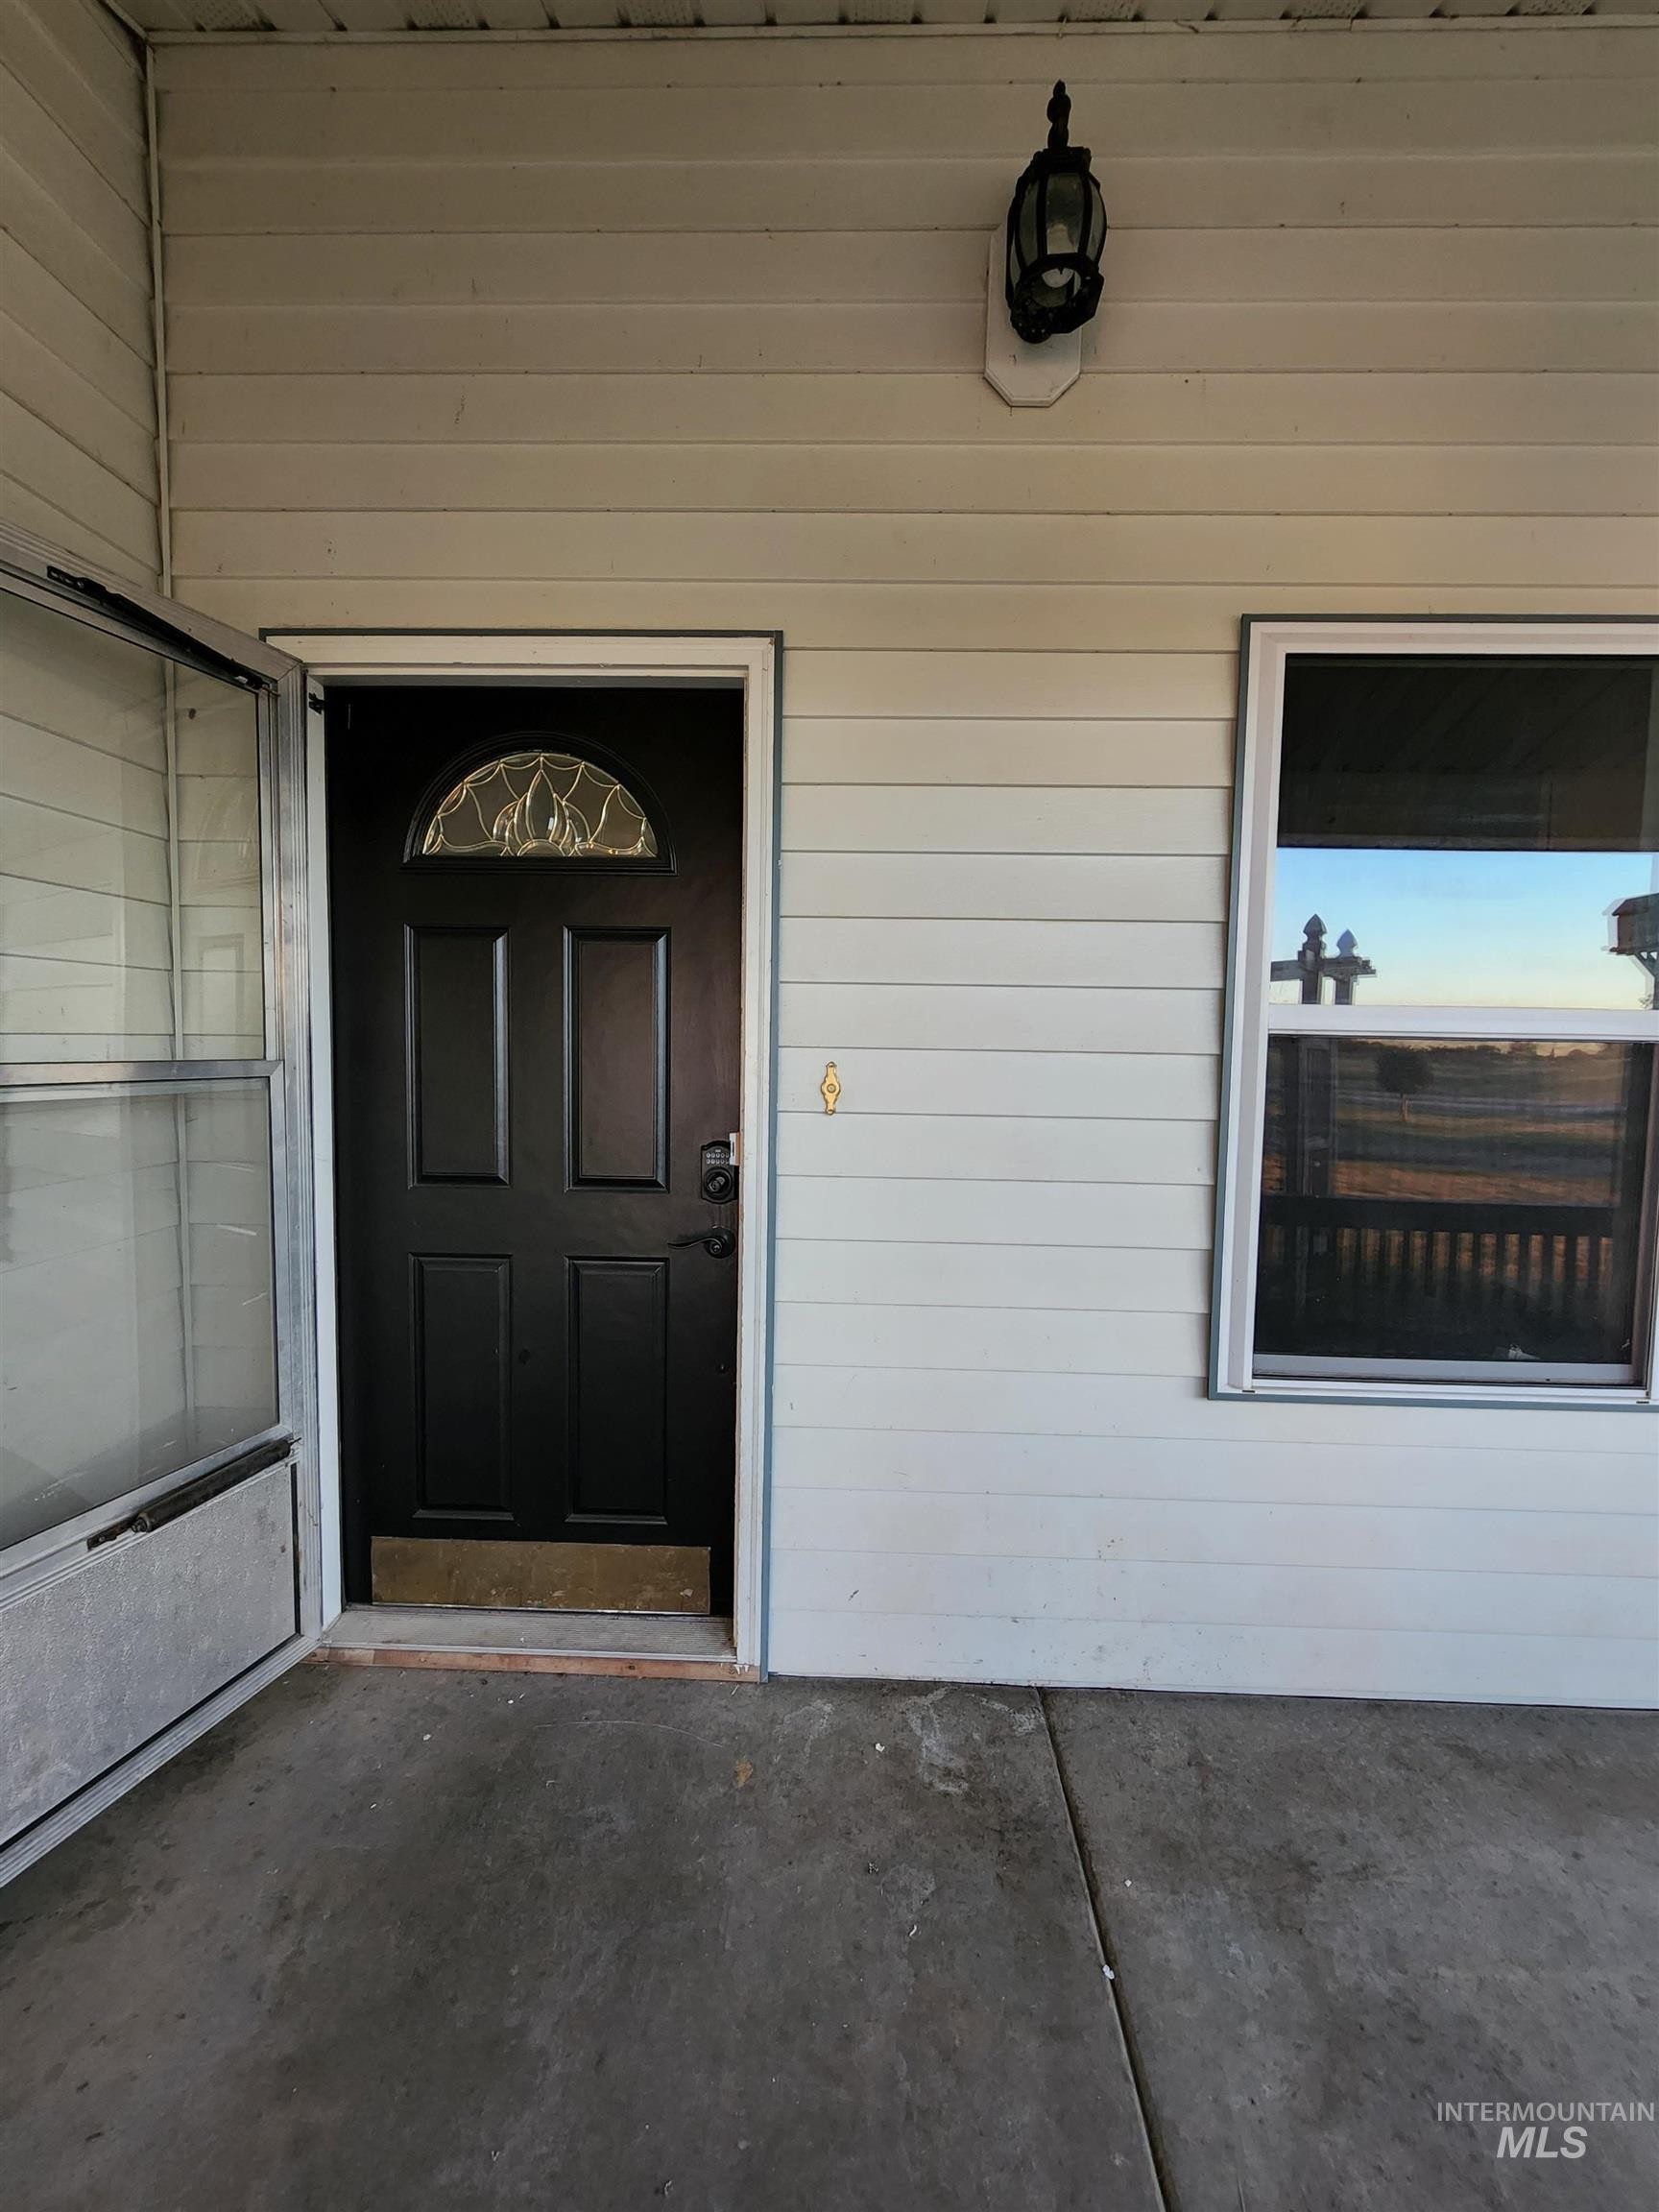 5787 Guido Ln., Nampa, Idaho, 83687, United States, 3 Bedrooms Bedrooms, ,2 BathroomsBathrooms,Residential,For Sale,5787 Guido Ln.,1434740